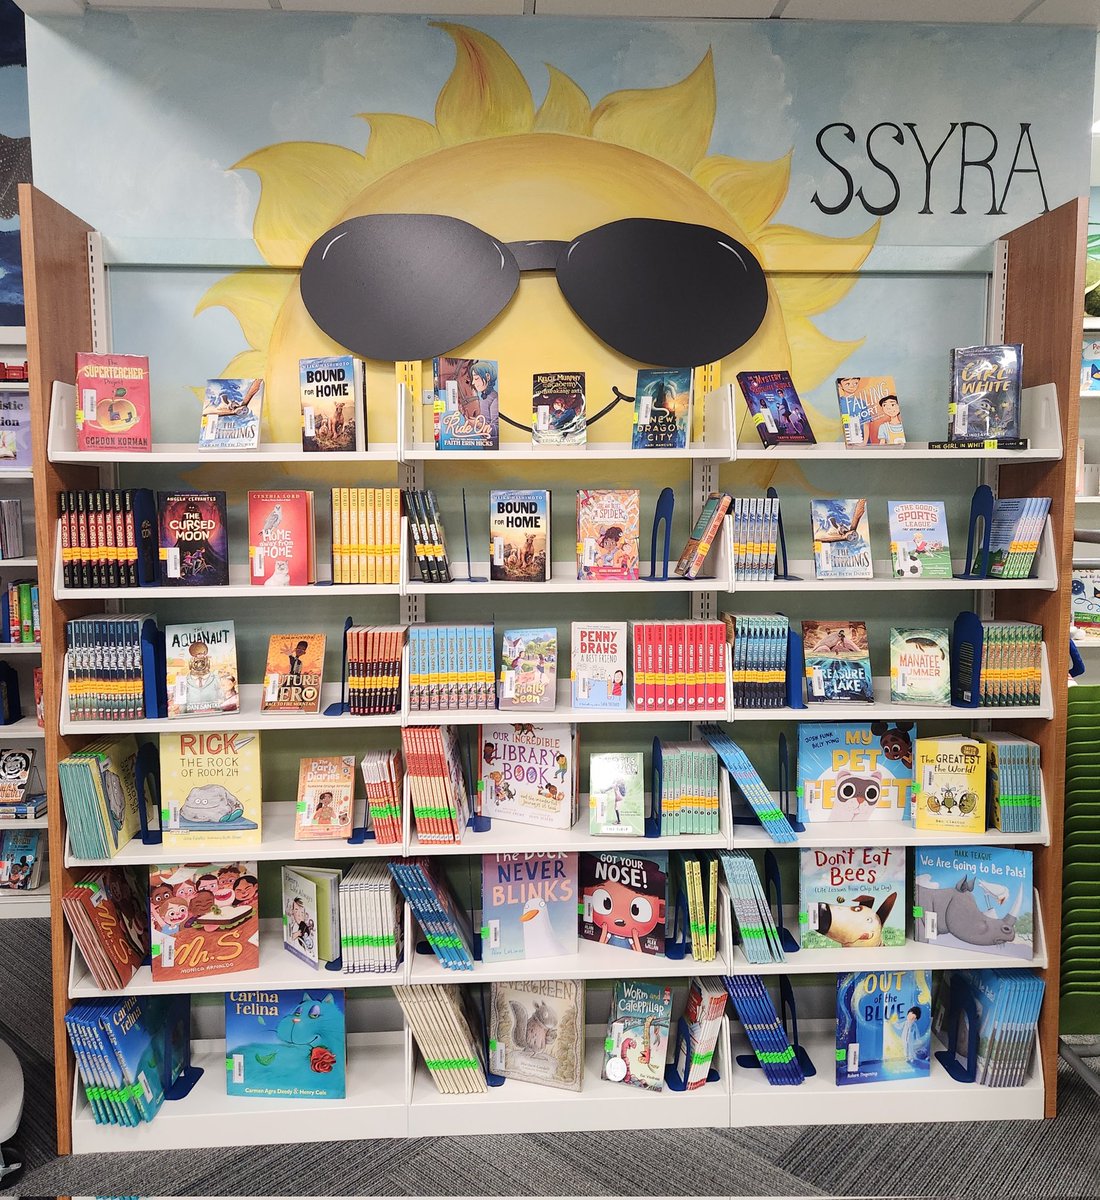 The 2024-2025 Sunshine State books are up and ready for check out. We don't waste a minute! @FloridaSSYRA @SSYRAJR @trishg1 @LisaOckerman #librarylife